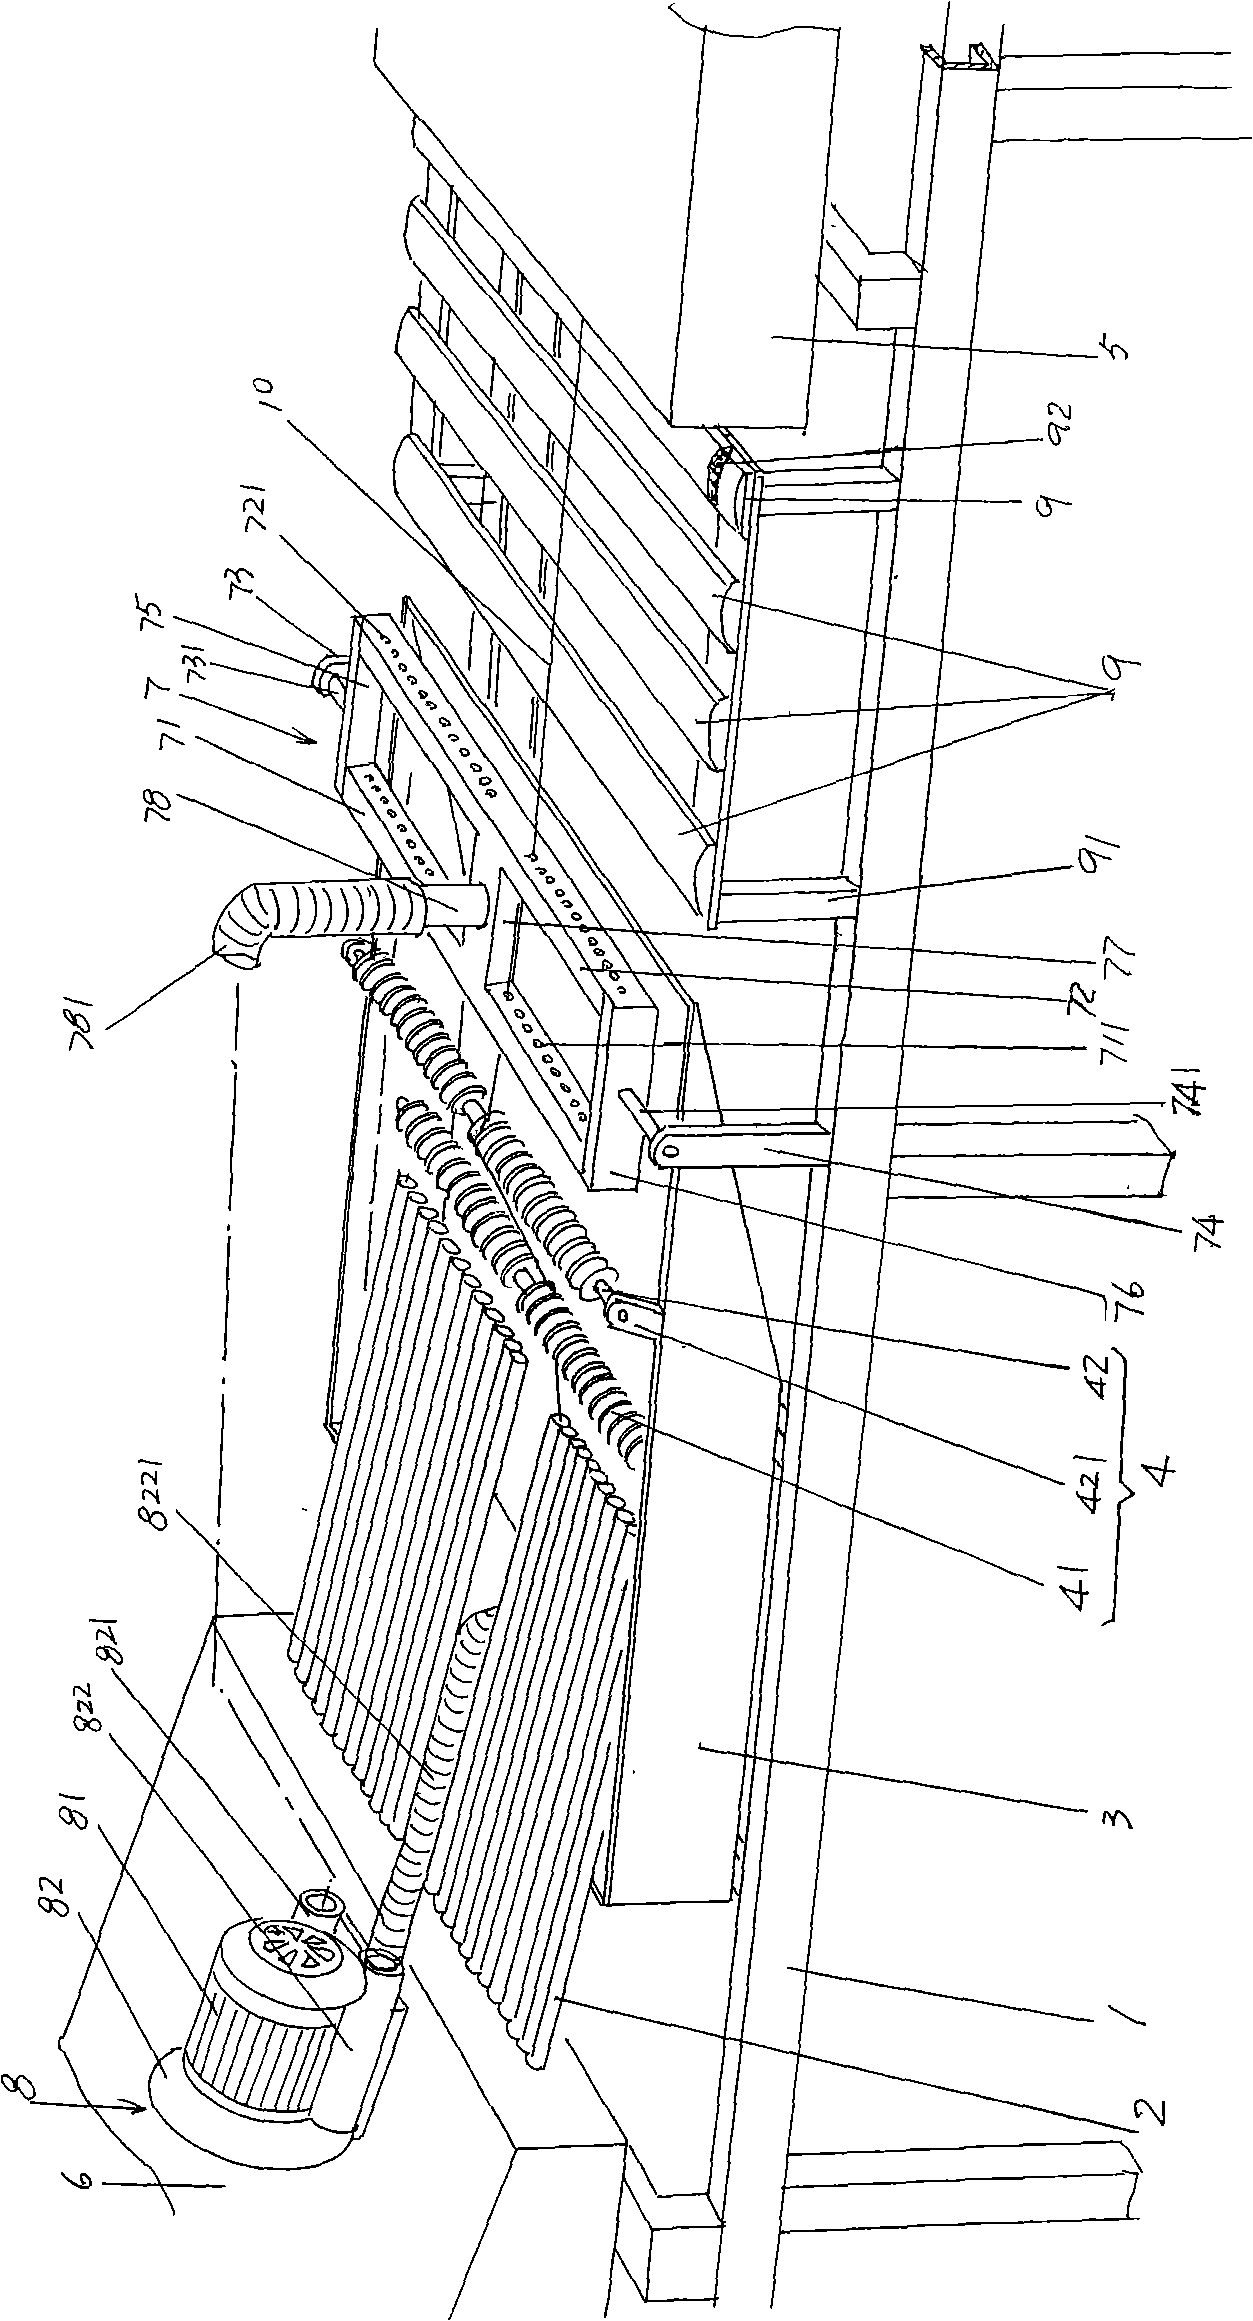 Annealing and cooling device for conductive wire